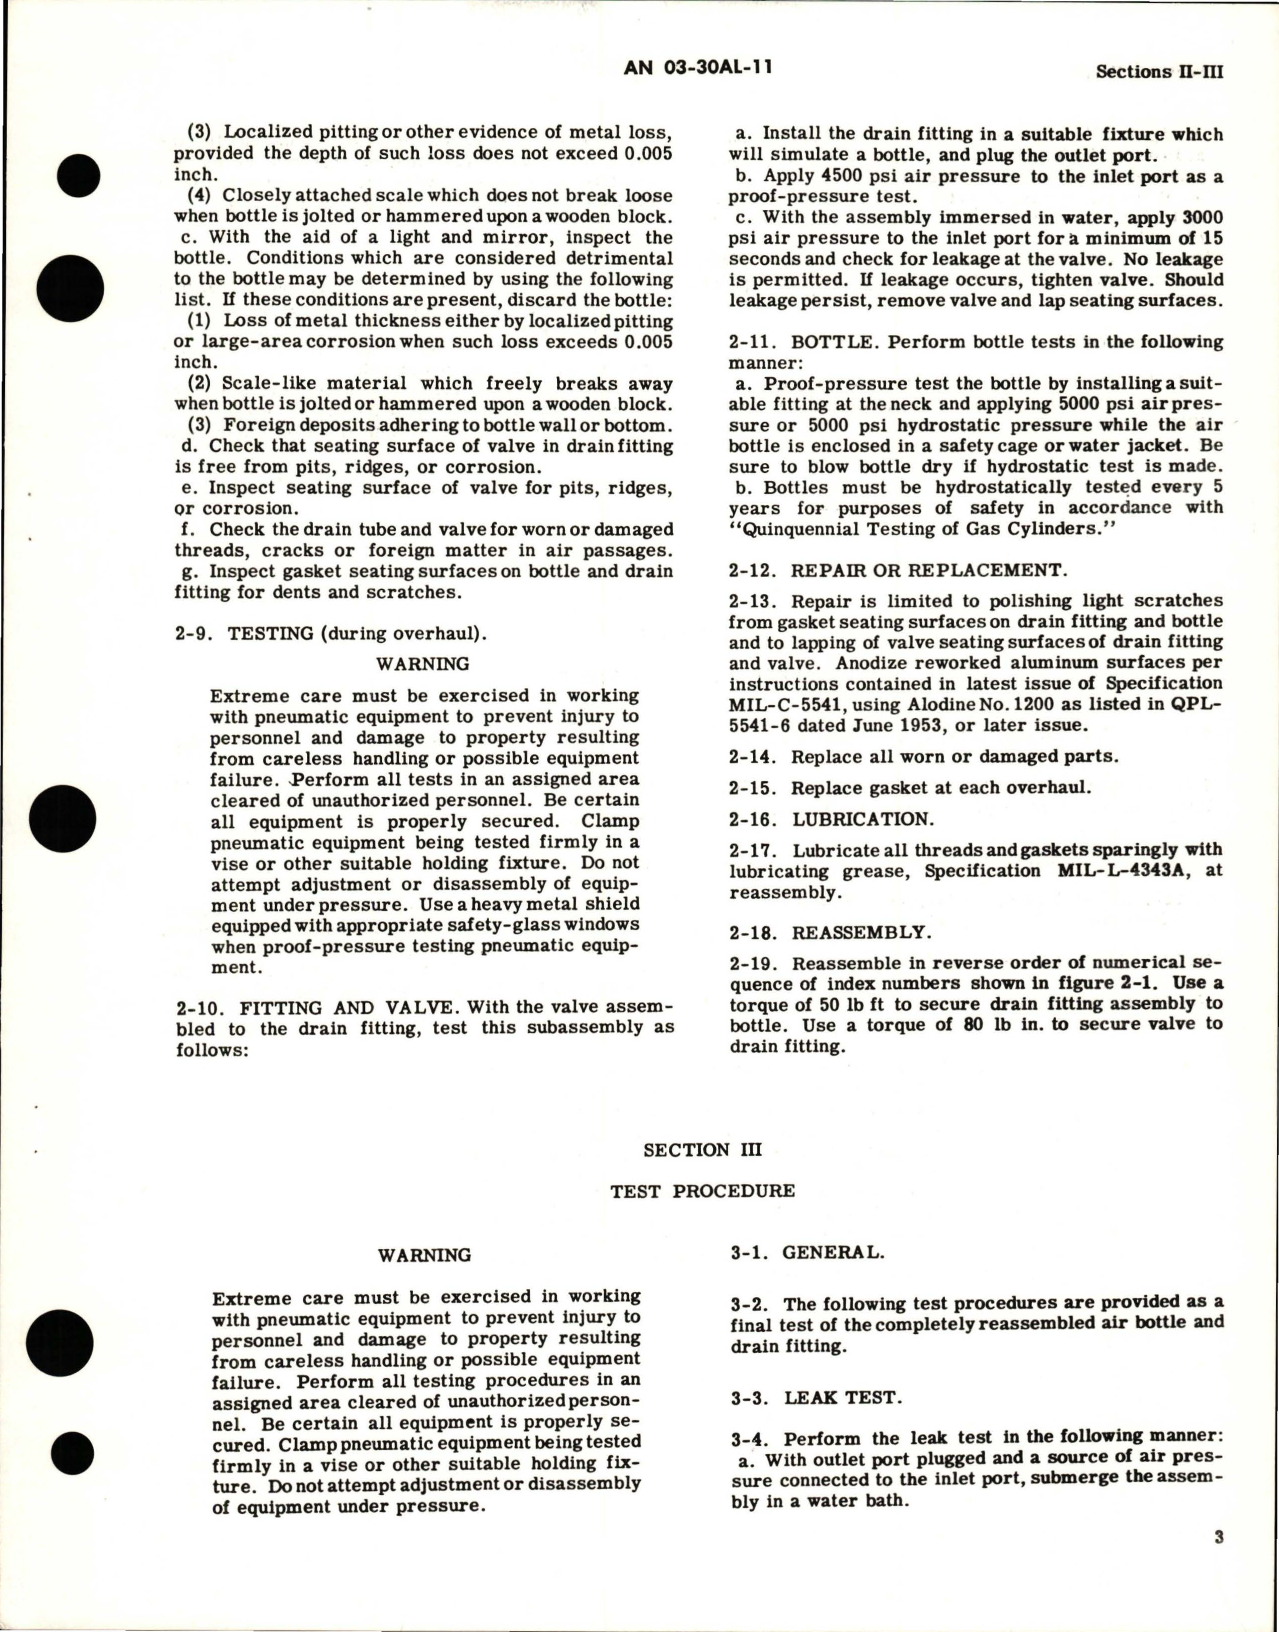 Sample page 7 from AirCorps Library document: Overhaul Instructions for Air Bottles and Drain Fittings 